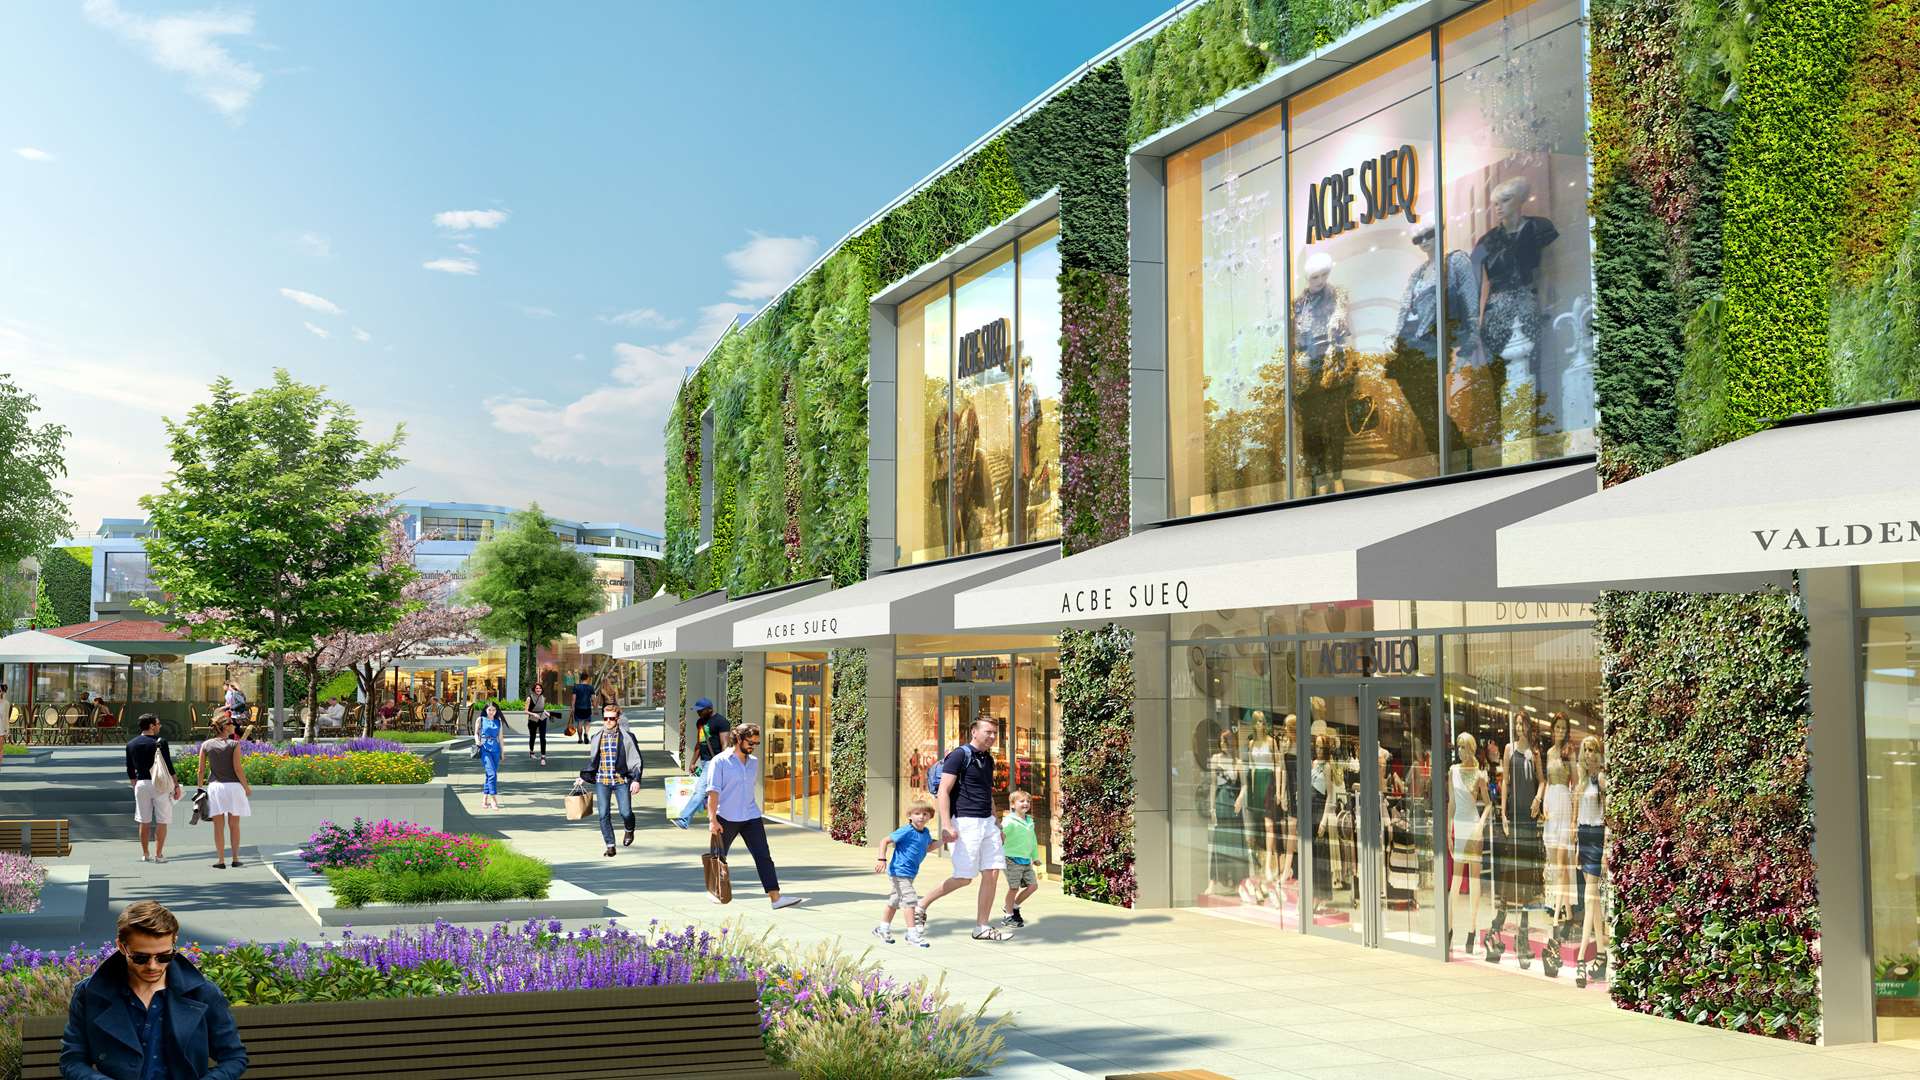 The Outlet will add 50 more shops or restaurants